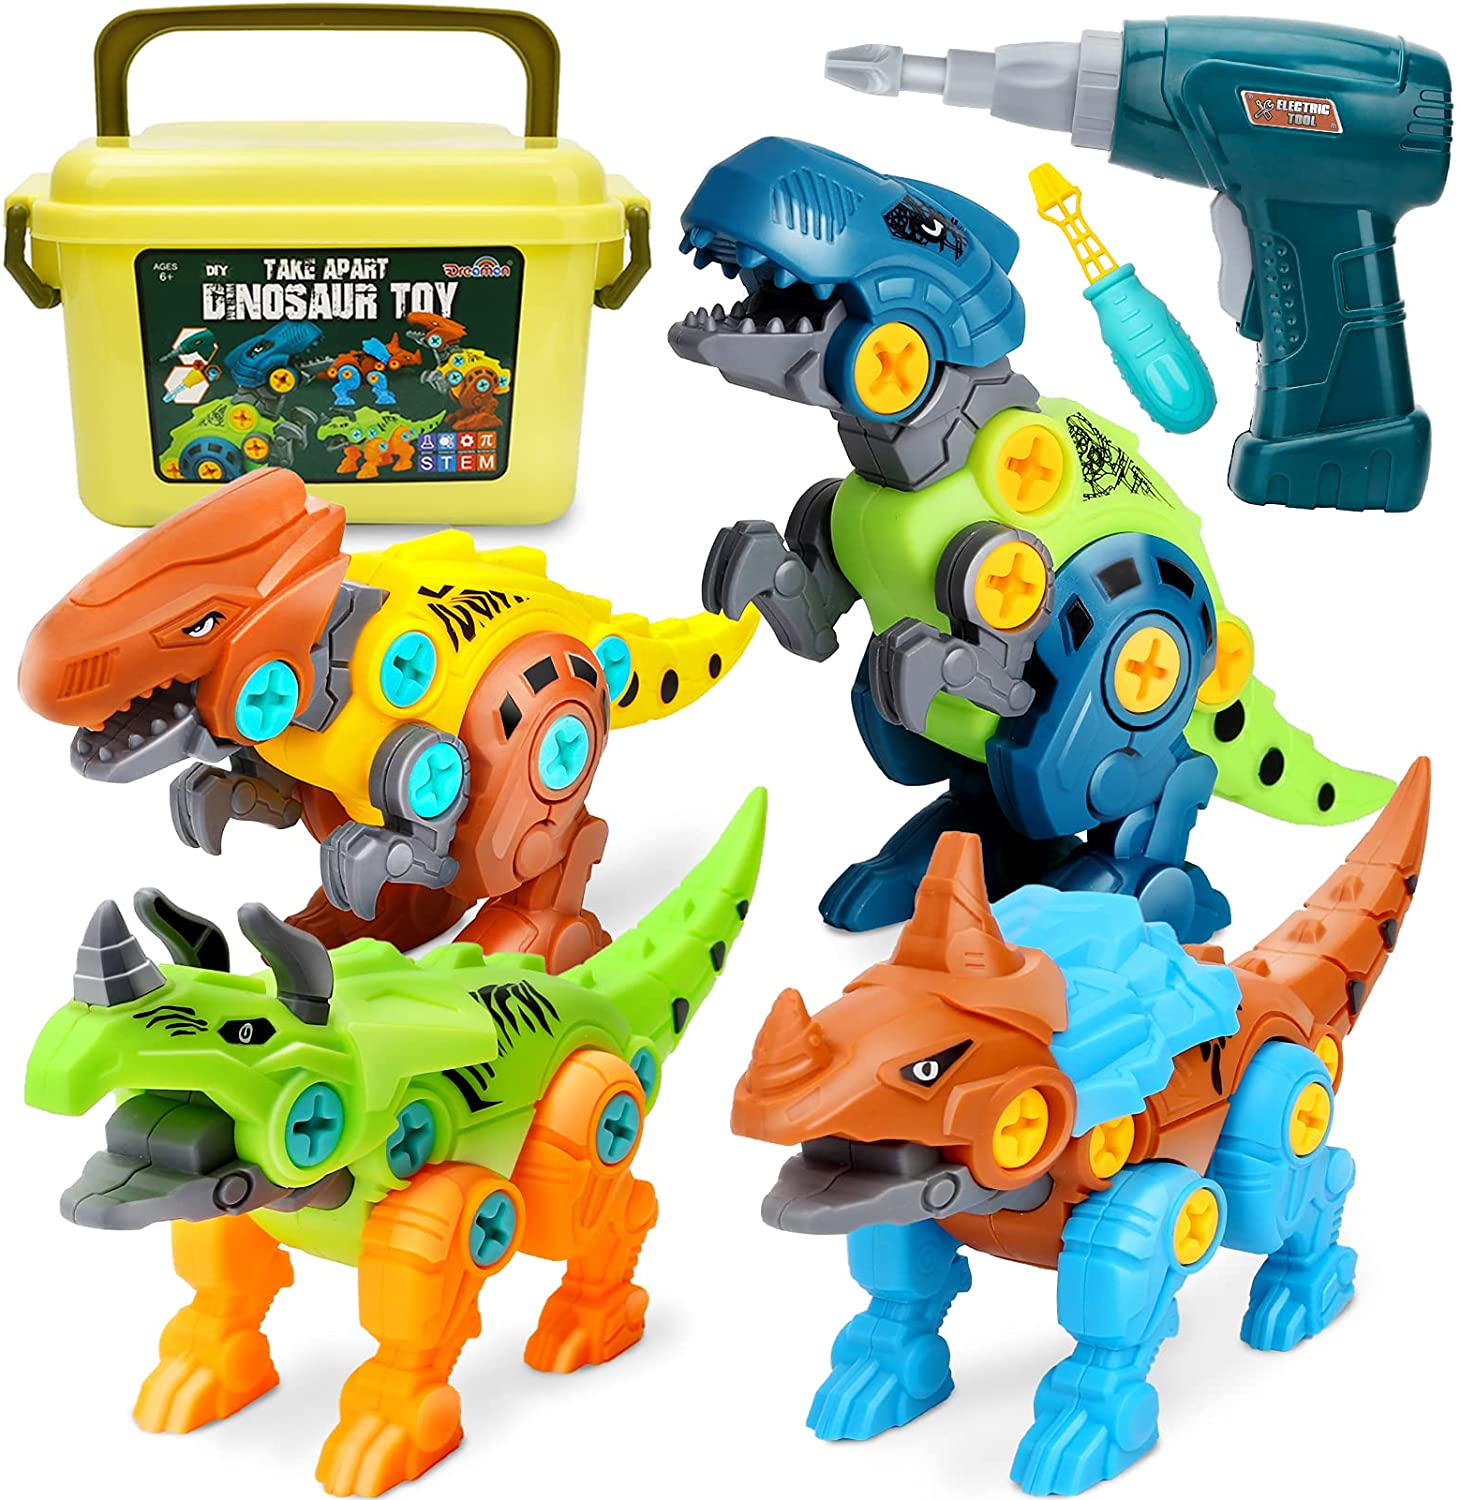 Take Apart Dinosaur Toys for Kids 5-7 – Dino Building Toy Set for Boys and Girls with Electric Drill Storage Box – Construction Play Kit Stem Learning Gifts for Kids